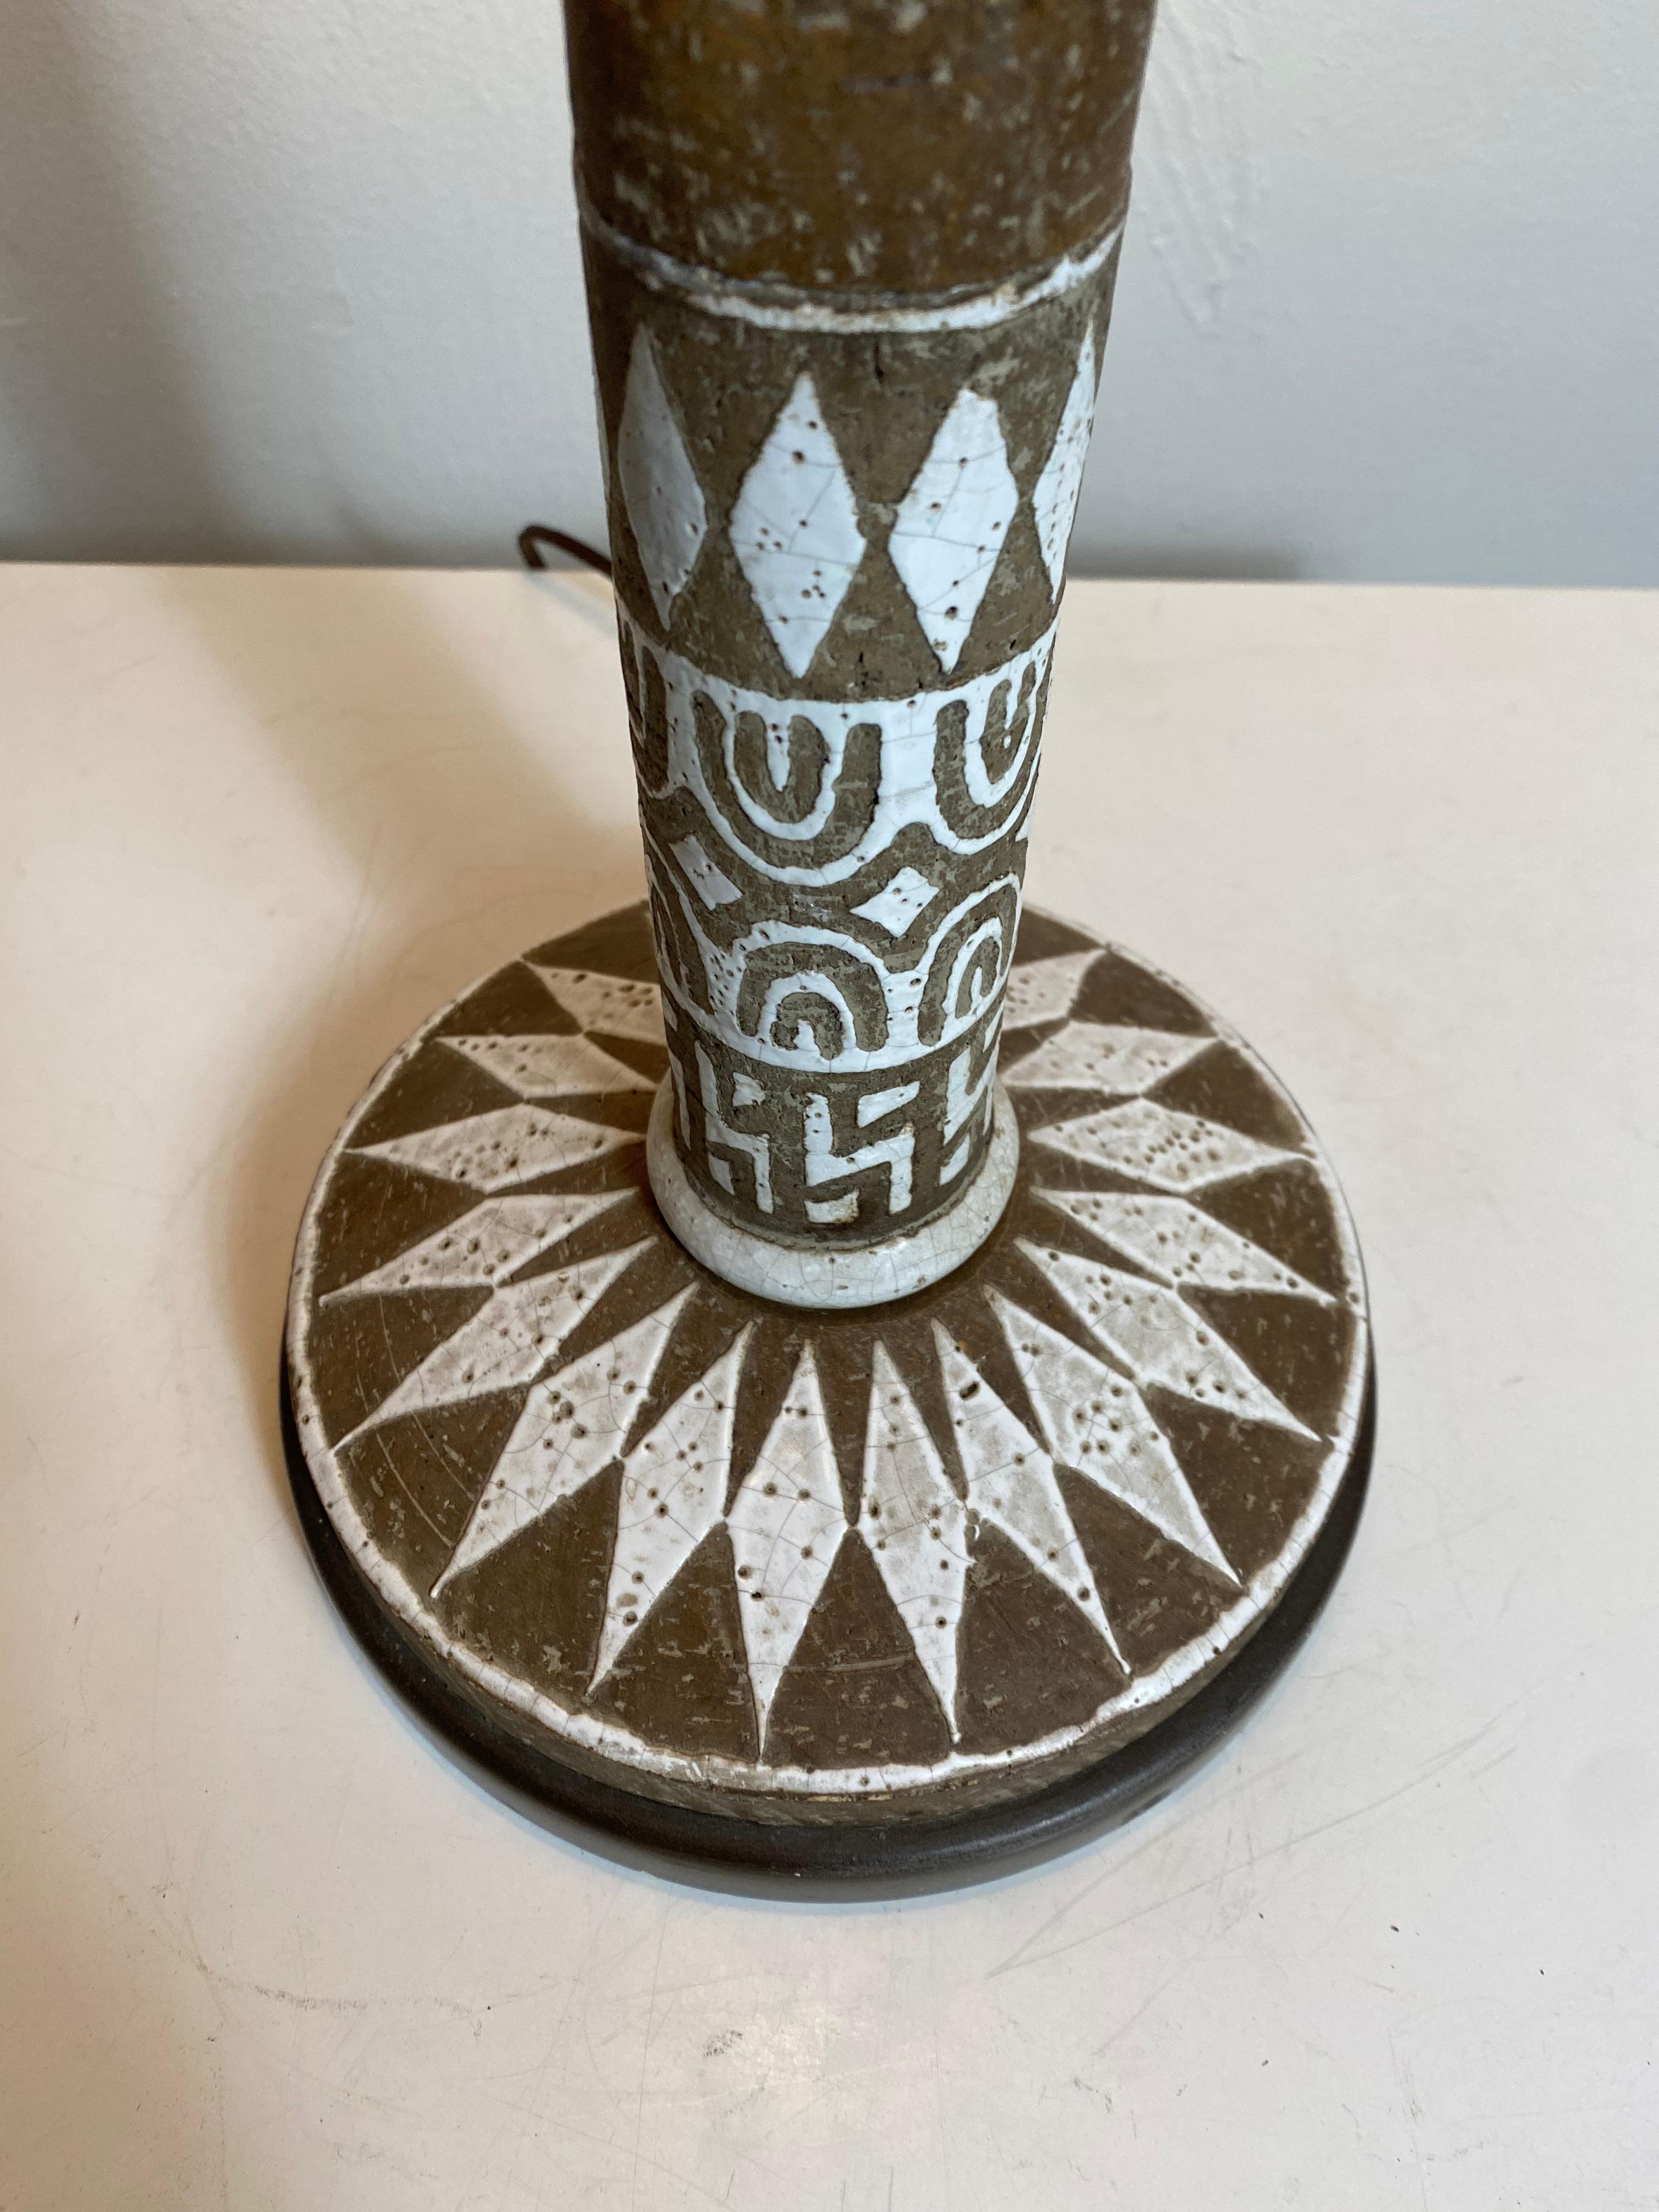 Stunning ceramic / art pottery lamp with a sgraffito design reminiscent of tribal designs and desirable designs by Guido Gambone. This lamp is a quintessential example of Italian design. Color, form and texture.